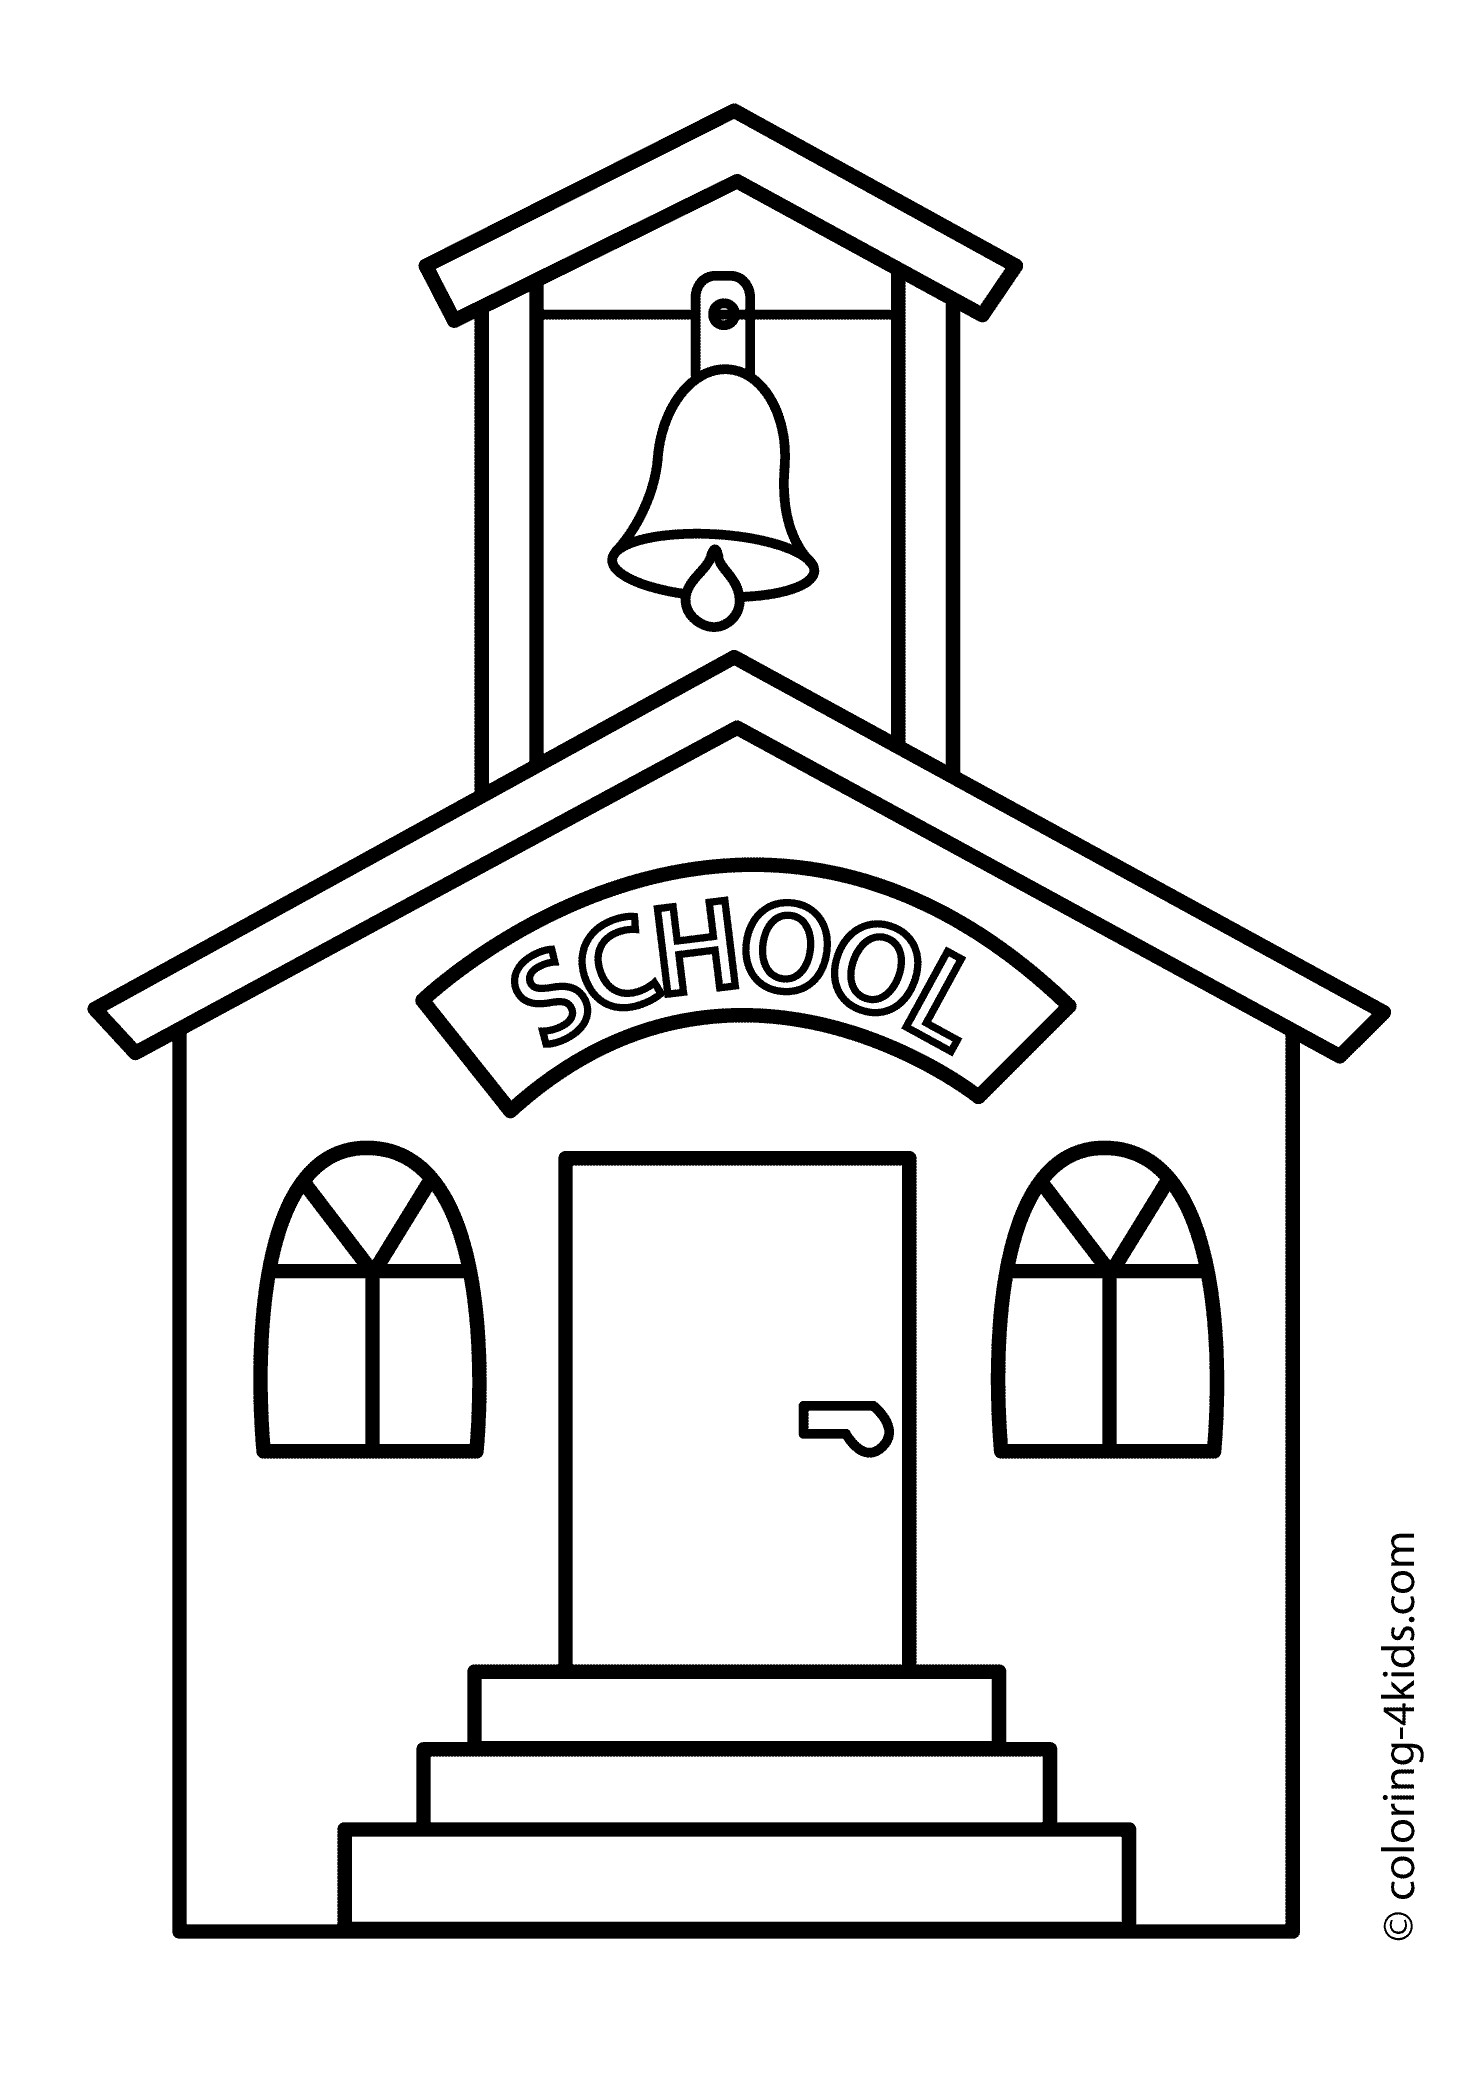 College Coloring Pages
 School building coloring page classes coloring page for